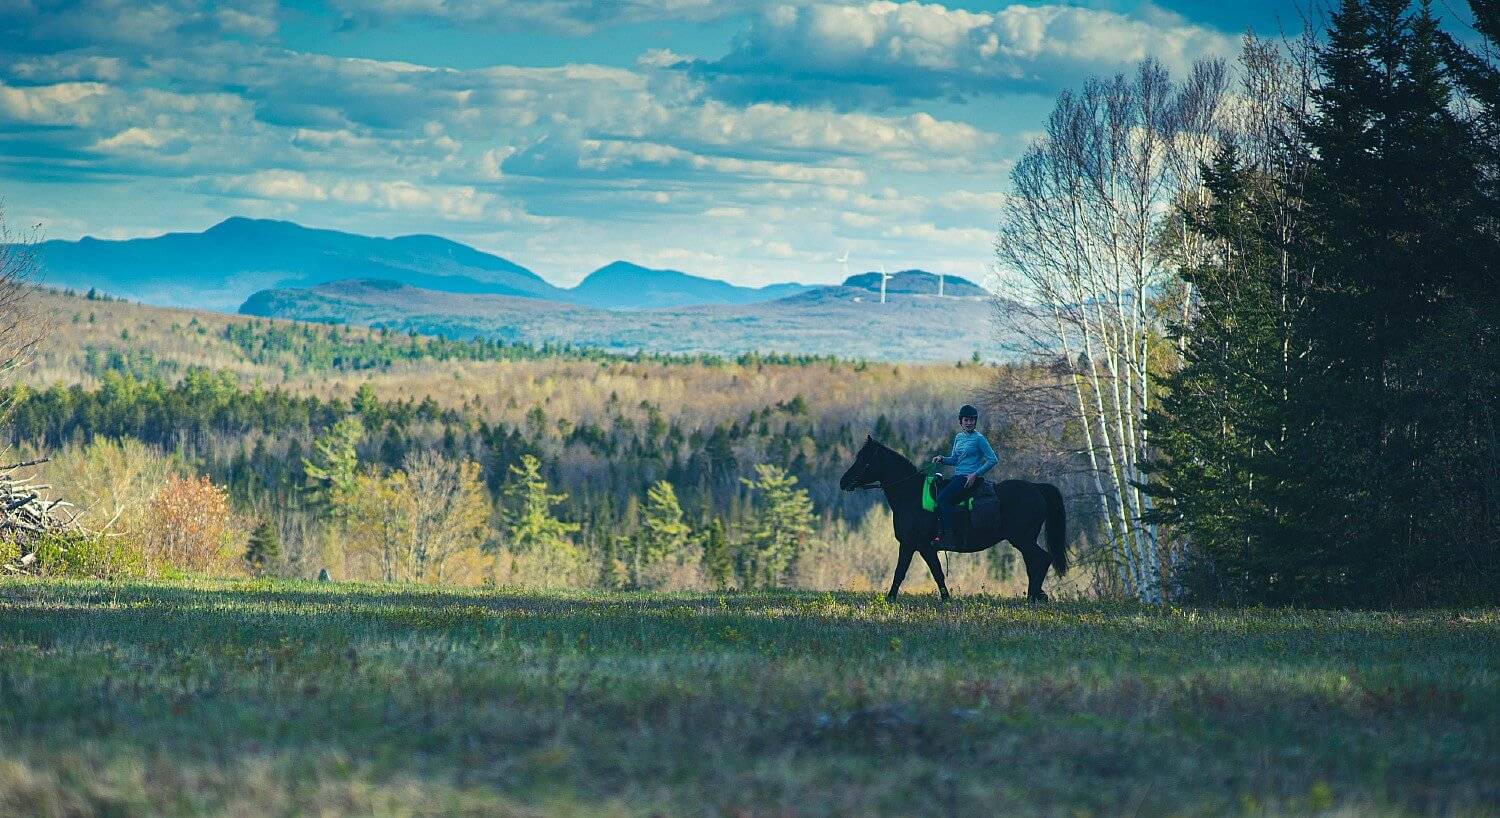 Single horse with rider standing in the middle of open land surrounded by forest and mountain range in the background